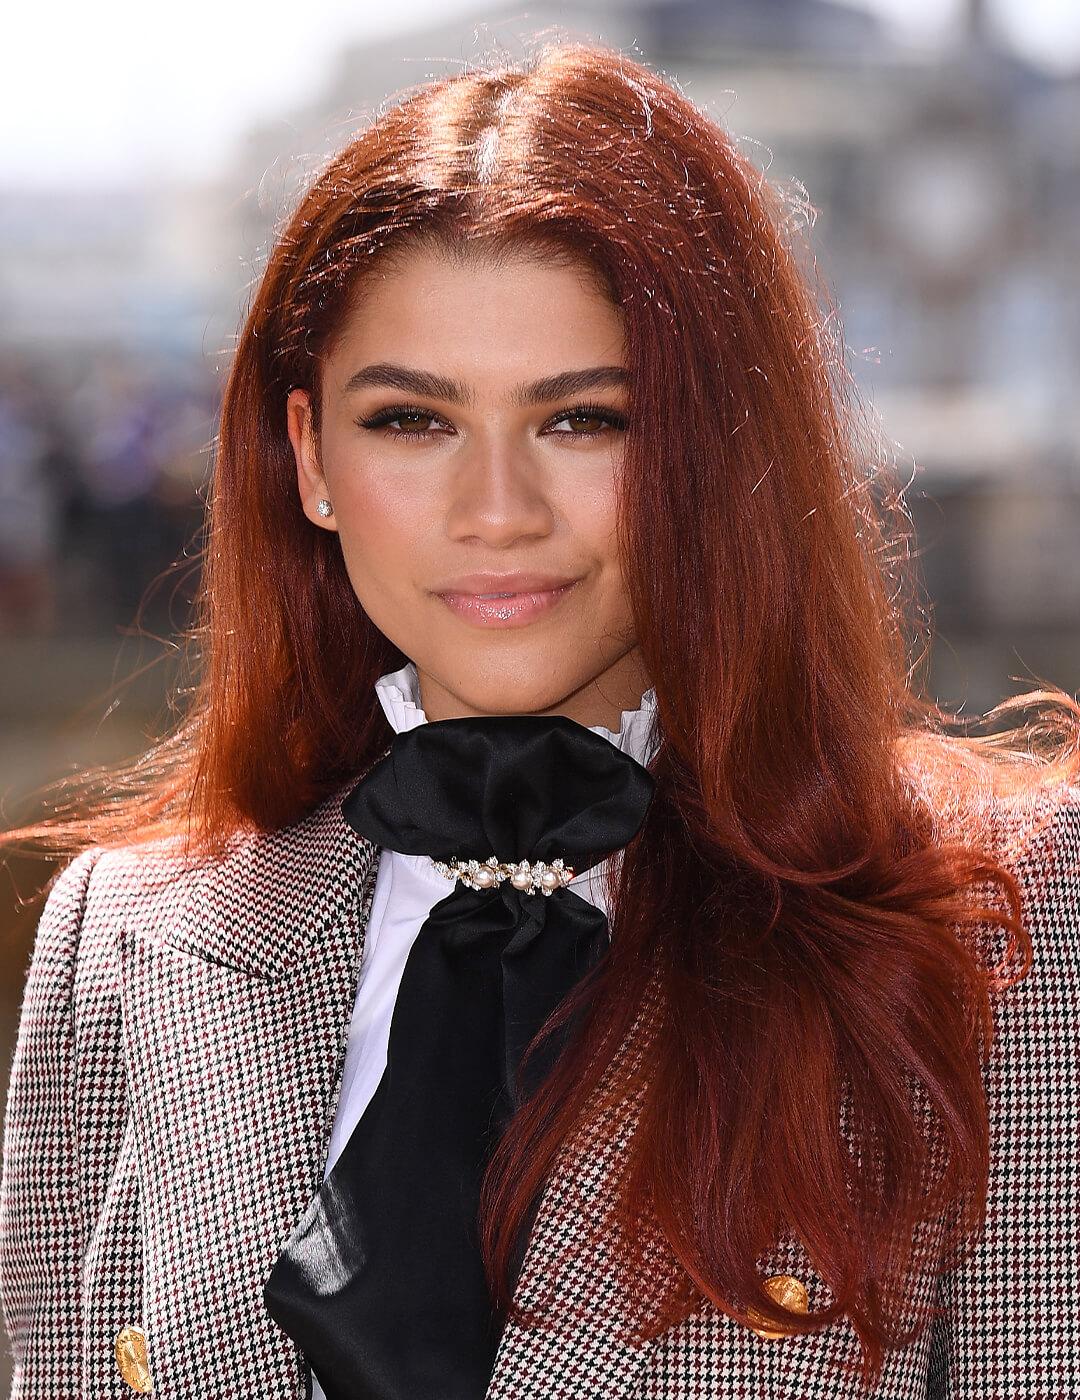 A photo of Zendaya looking chic with a copper hair color